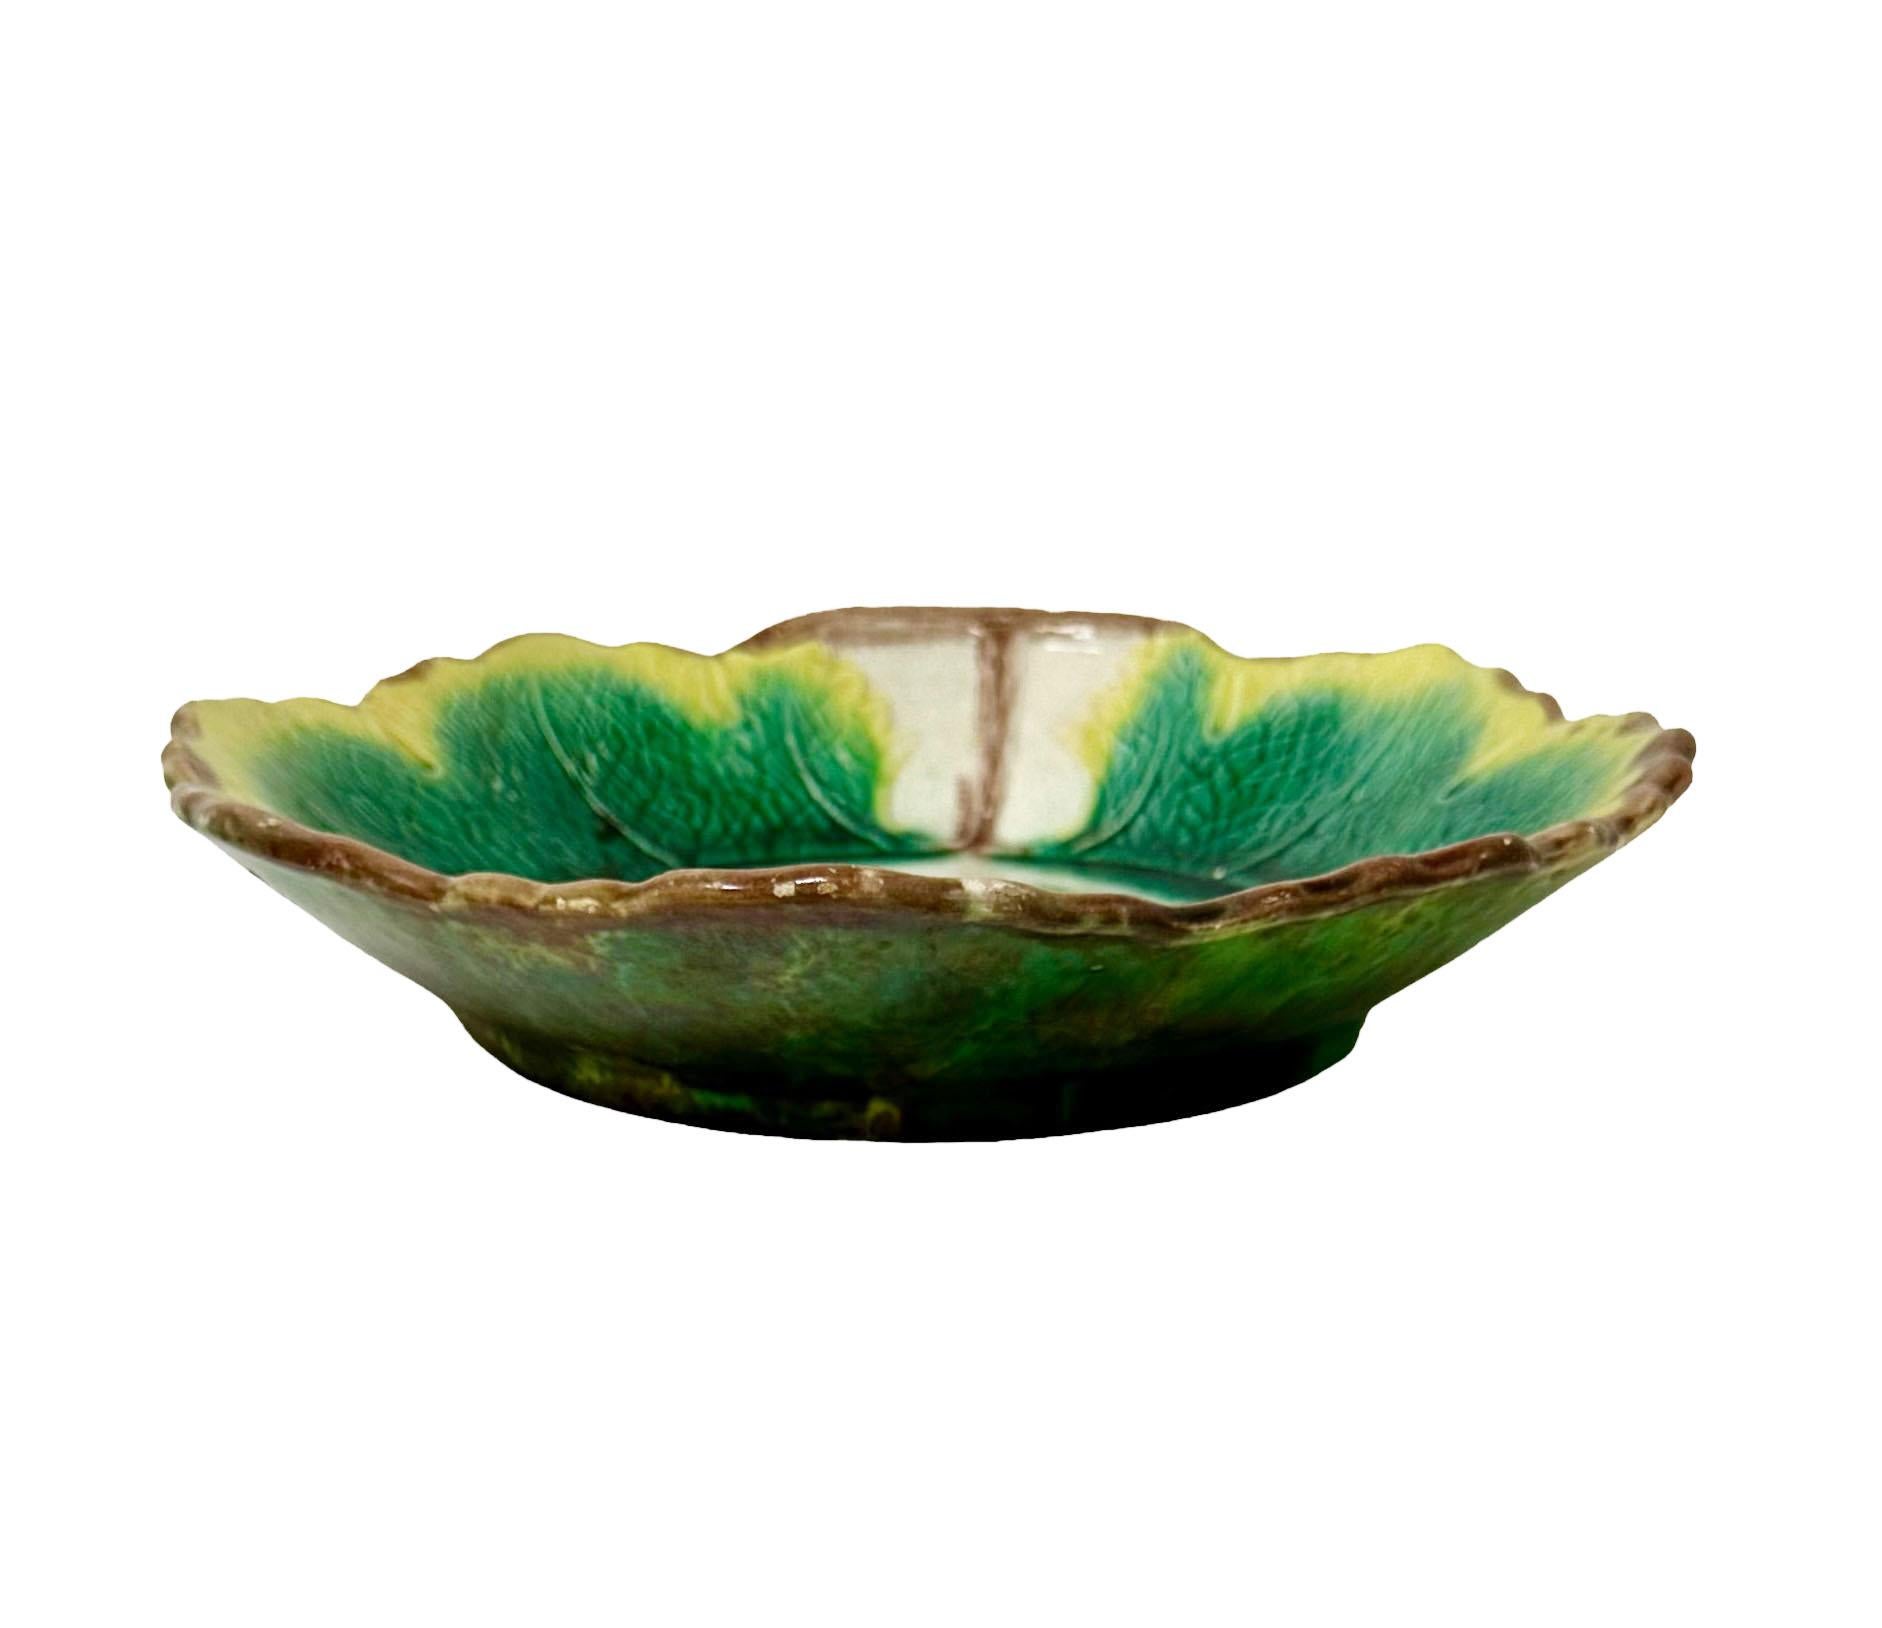 A green Majolica bowl with a beautiful leaf in the center and a scalloped edge. England, circa 1880s.